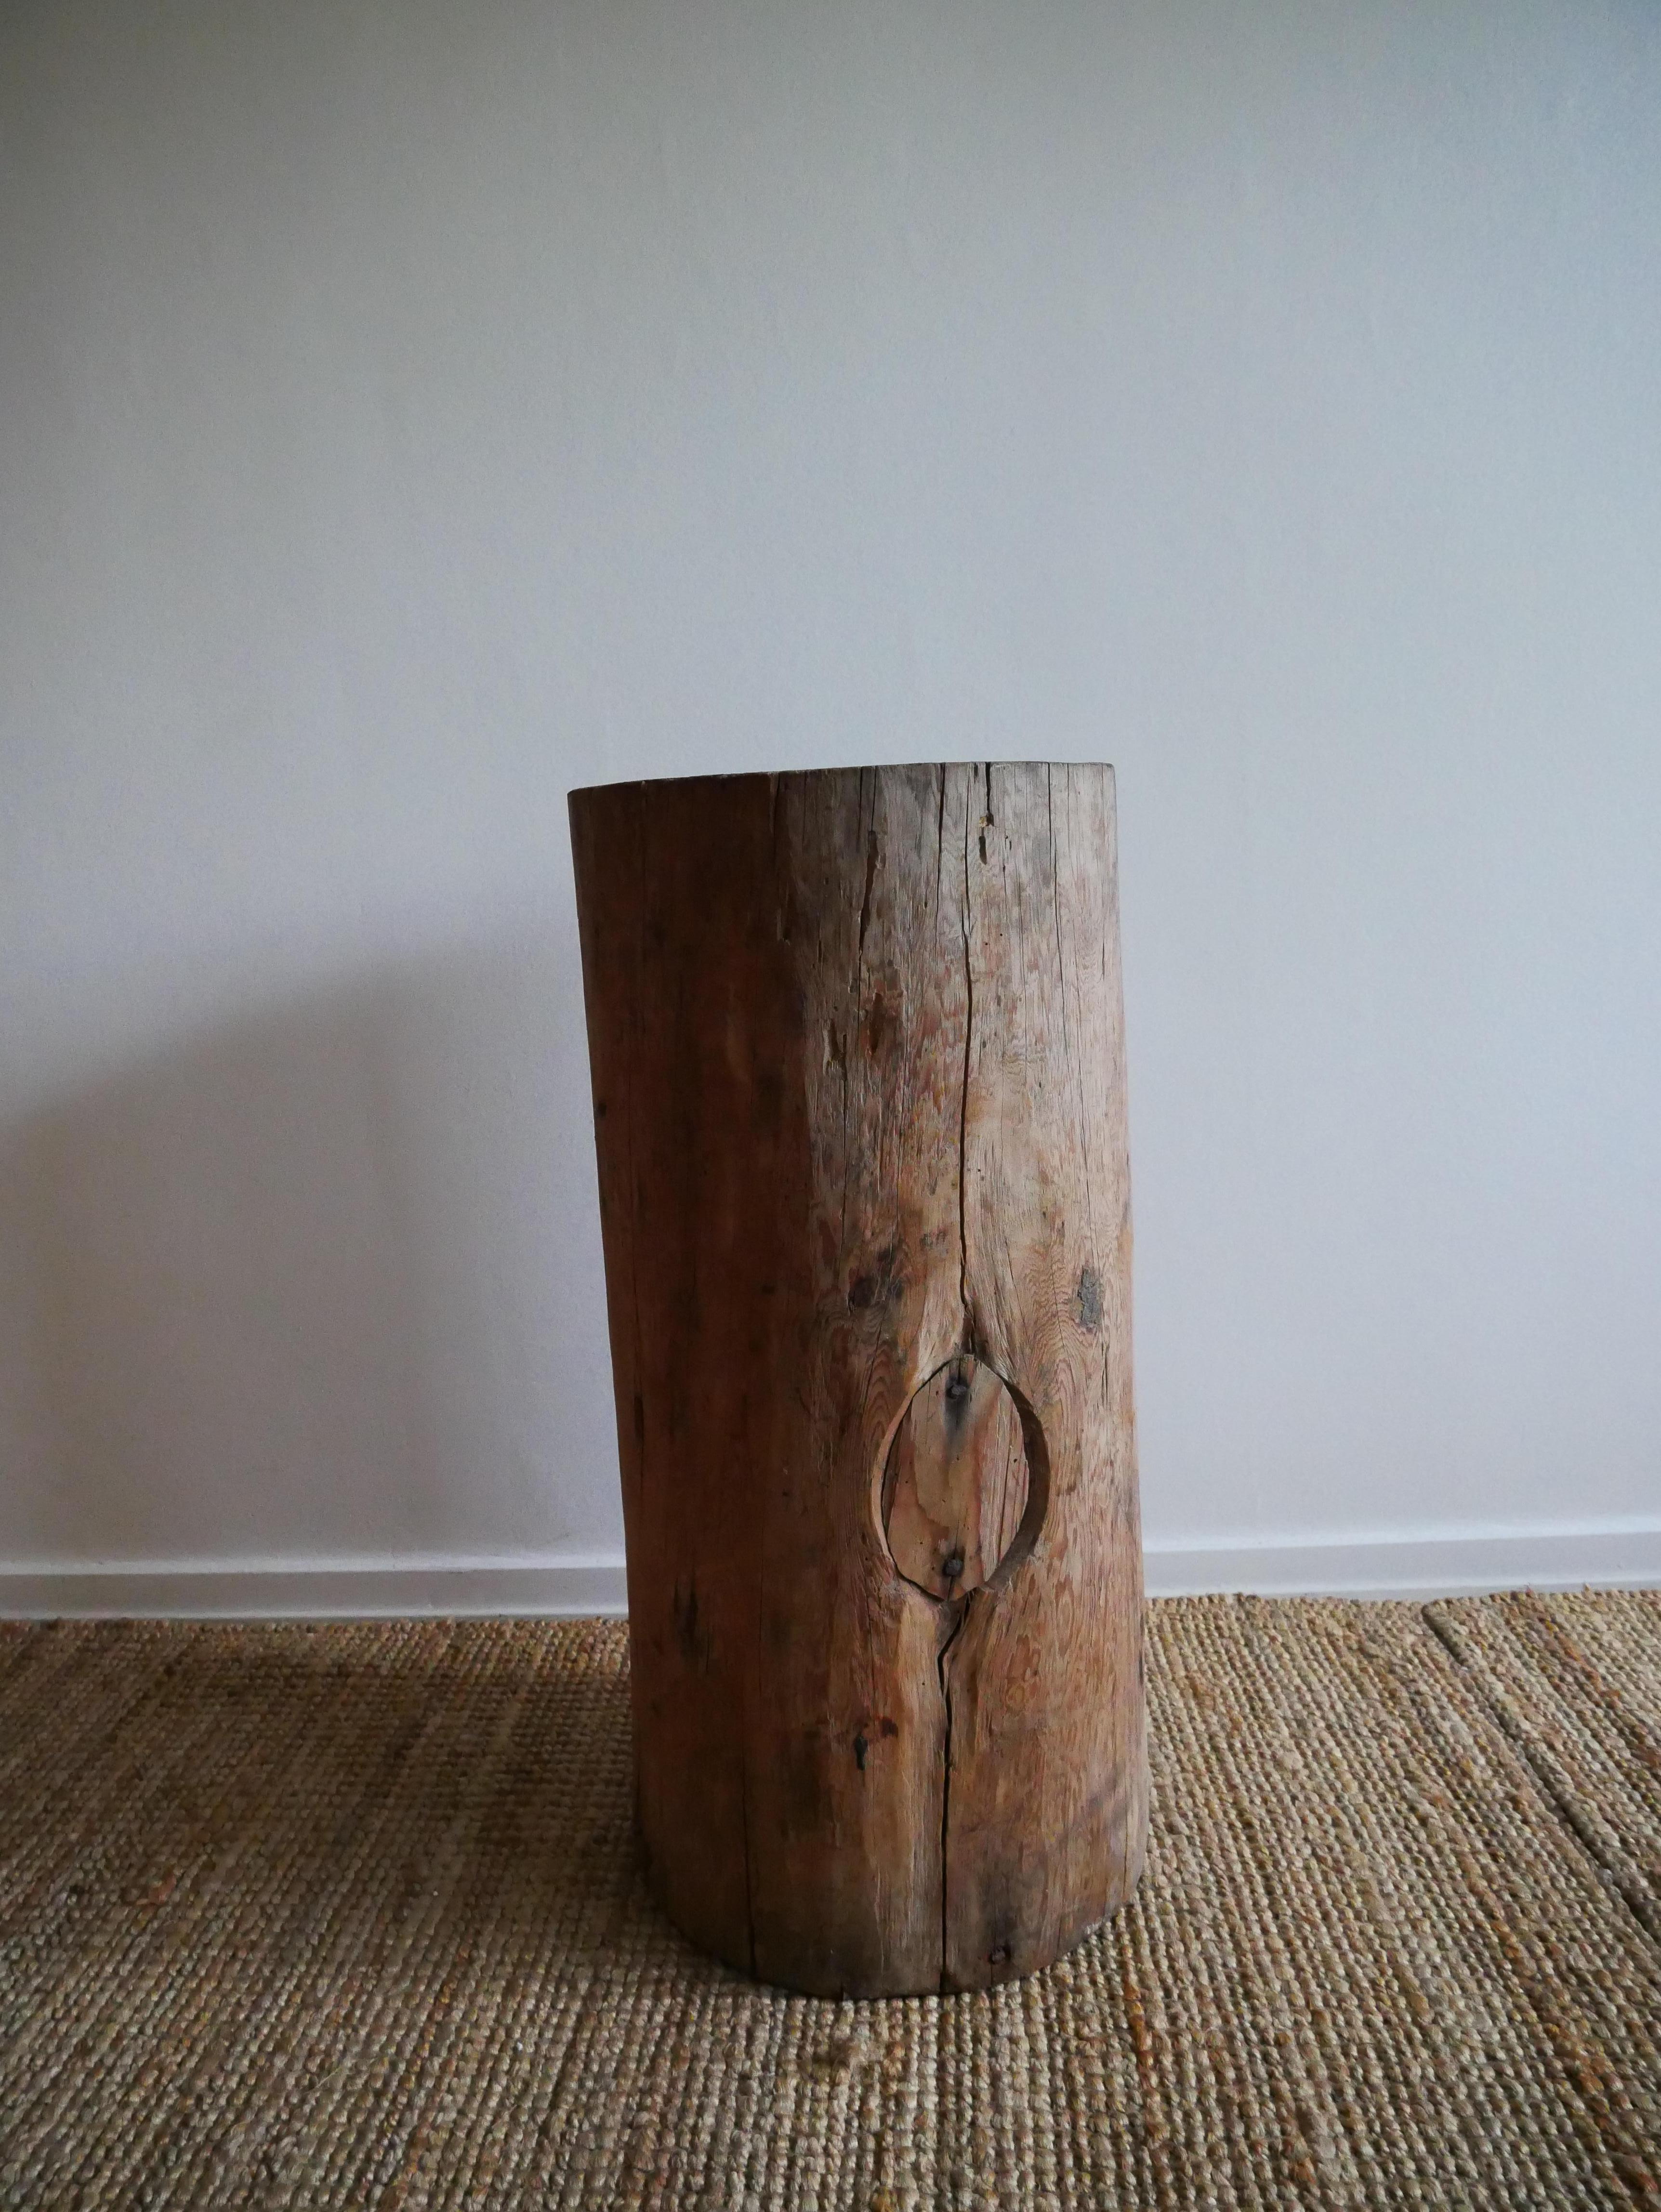 A rare Swedish Laggkärl/Planter from the late 1800-century. 

Made from a single solid dugout tree trunk with a attatched bottom.
Simular to the Japanese nagga pots.
Its works perfekt as a planer in any setting.

Height: 70 cm
Diameter: 33-36 cm